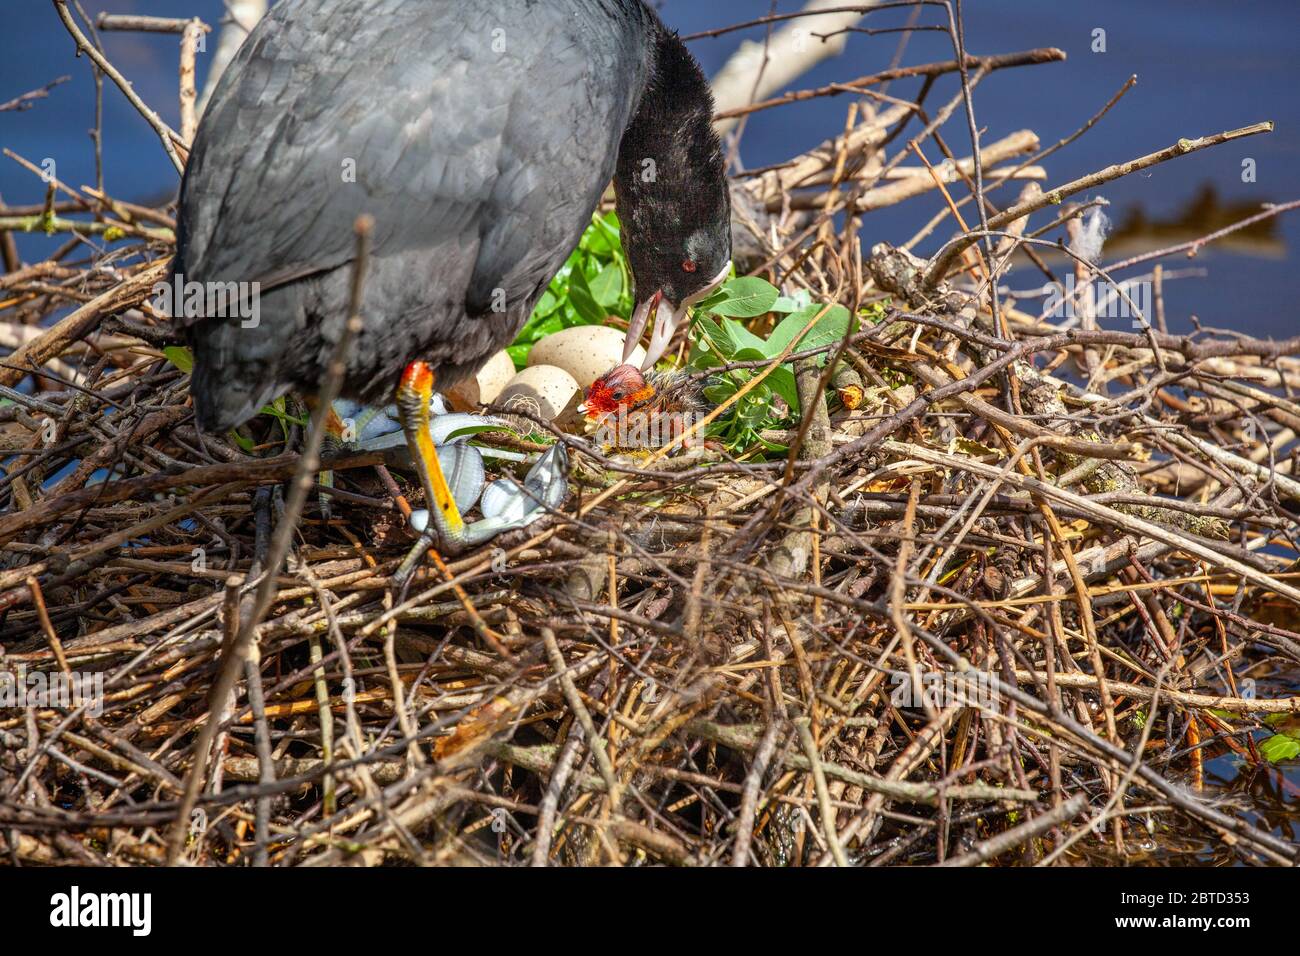 Water bird Coot Fulica atra on its nest with eggs and chicks on Winterley Pool Cheshire England Stock Photo